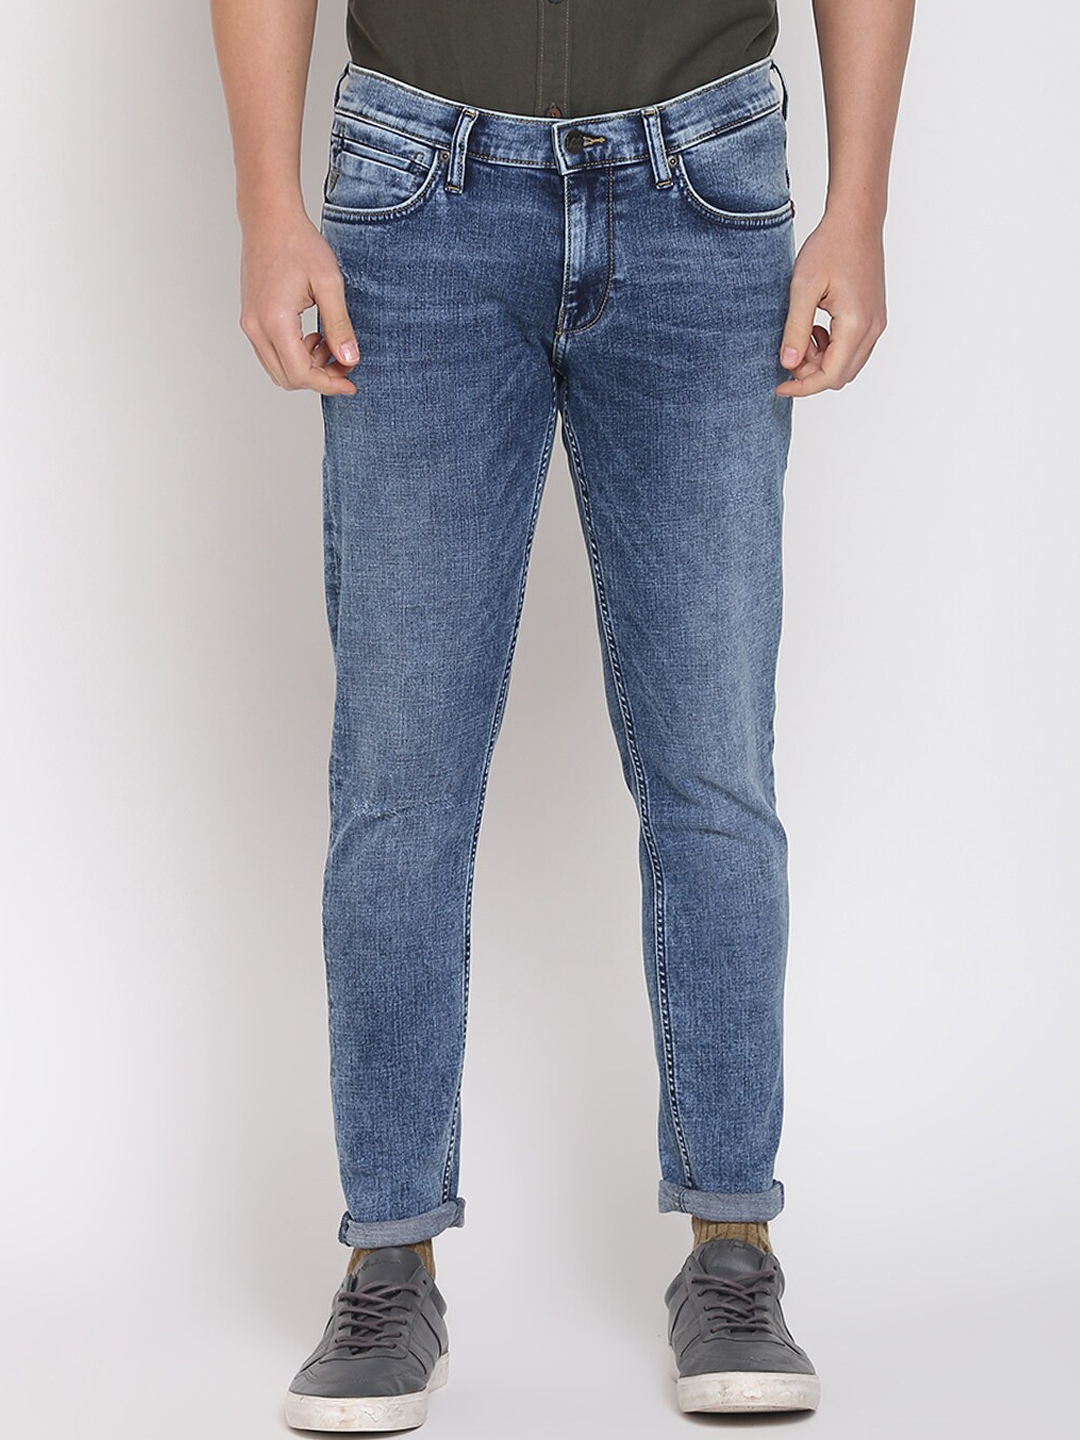 Lee Men s Jeans Best Price in India | Lee Men s Jeans Compare Price ...